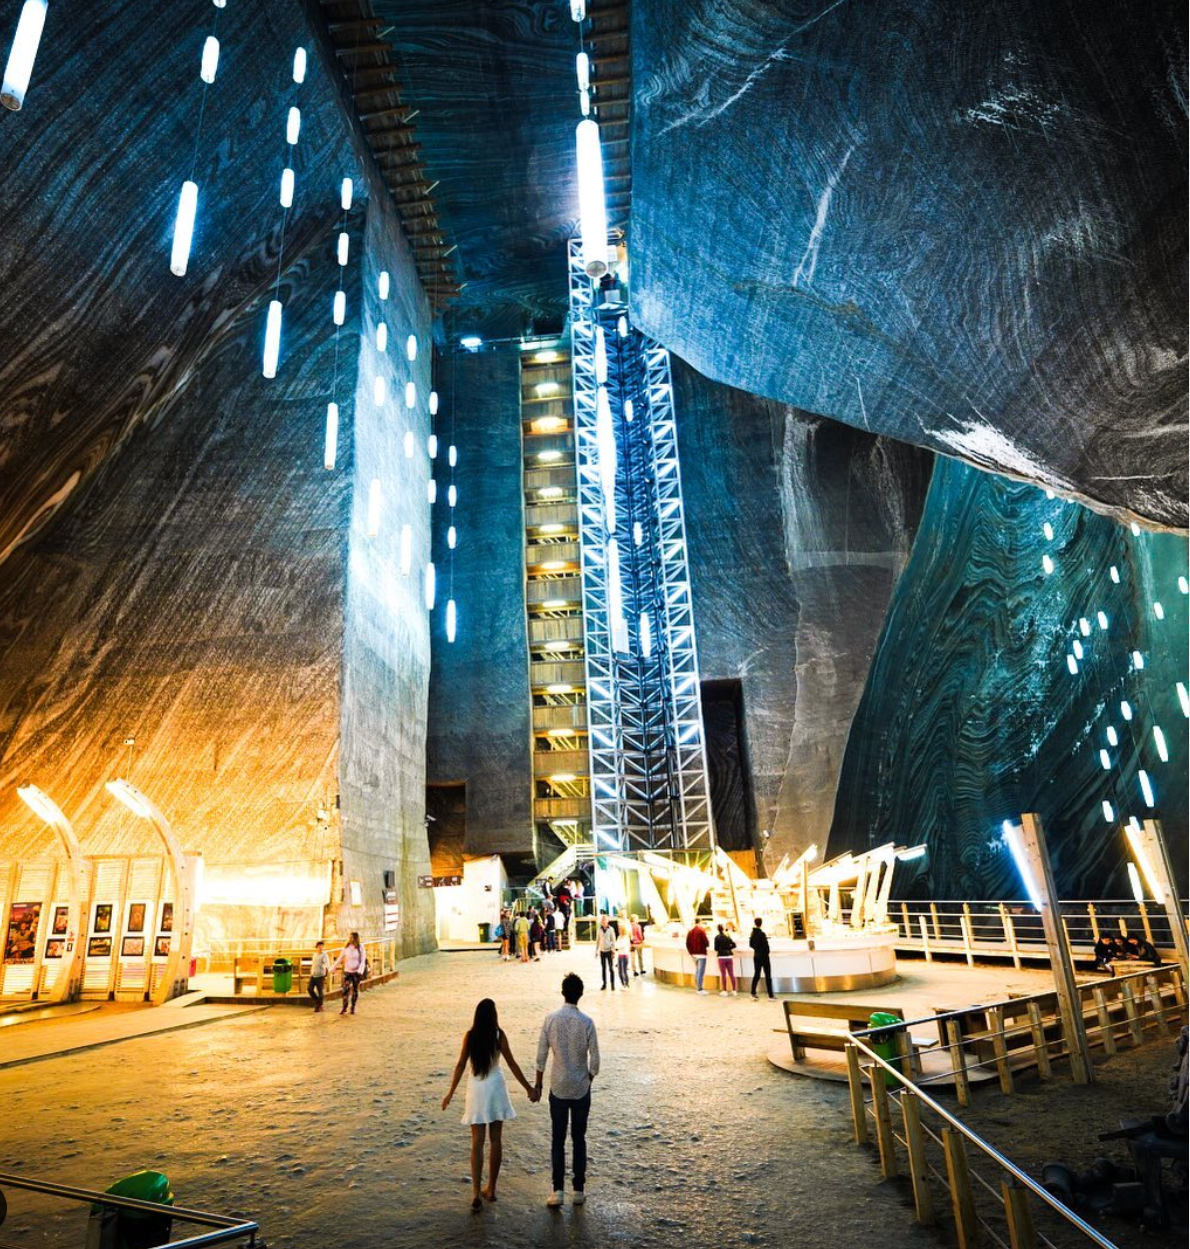 salt mine in Romania, best place to travel in July